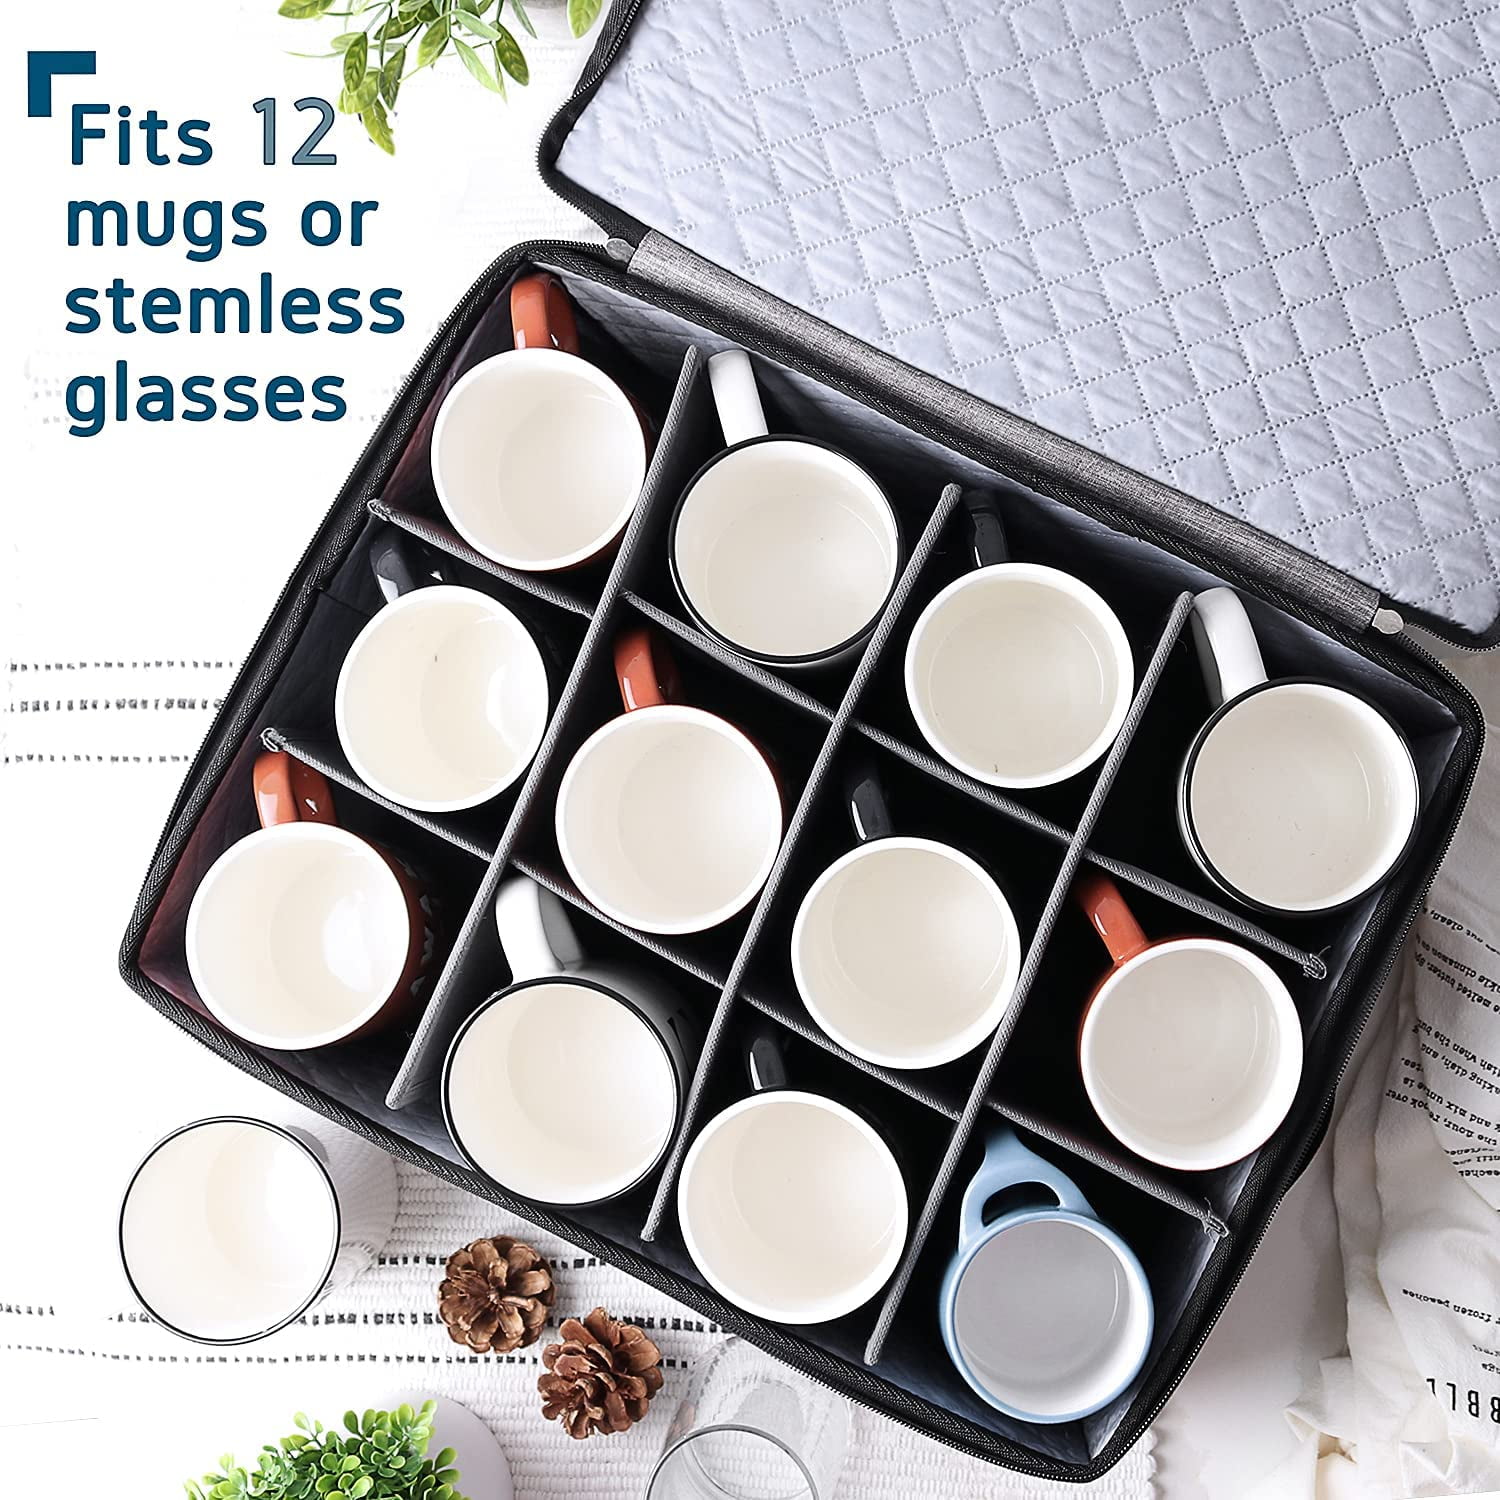  Fine China Storage Containers Hard Shell, Dish Storage  Containers, Flatware & Utensil Storage, Mug Storage, Platter Storage and  Wine Glass Storage Box with Dividers, Durable 8 Piece Dinnerware Storage :  Home